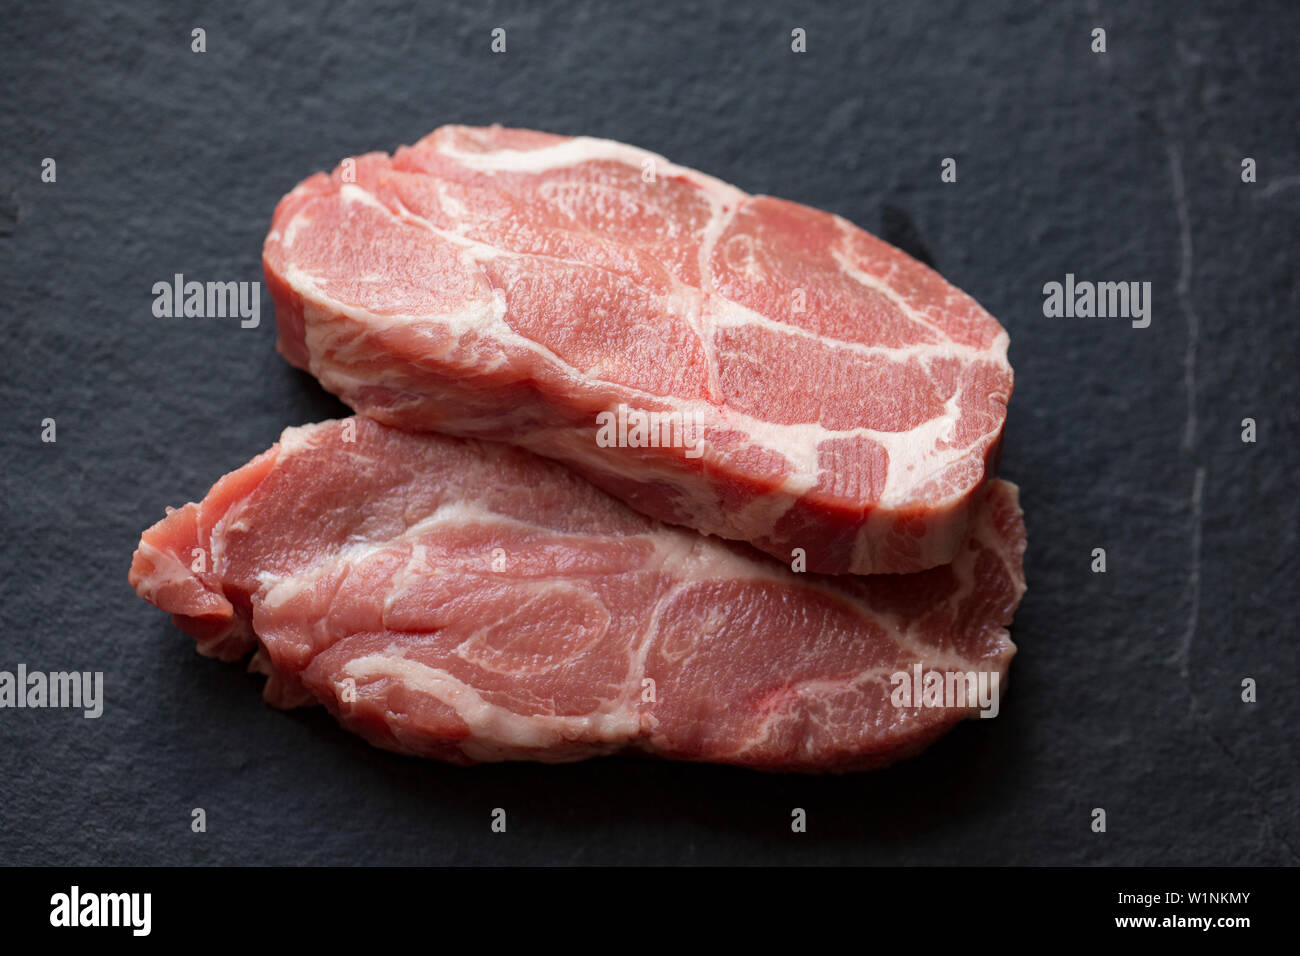 Two raw, uncooked British pork shoulder steaks bought from a supermarket in the UK. Dorset England UK GB Stock Photo